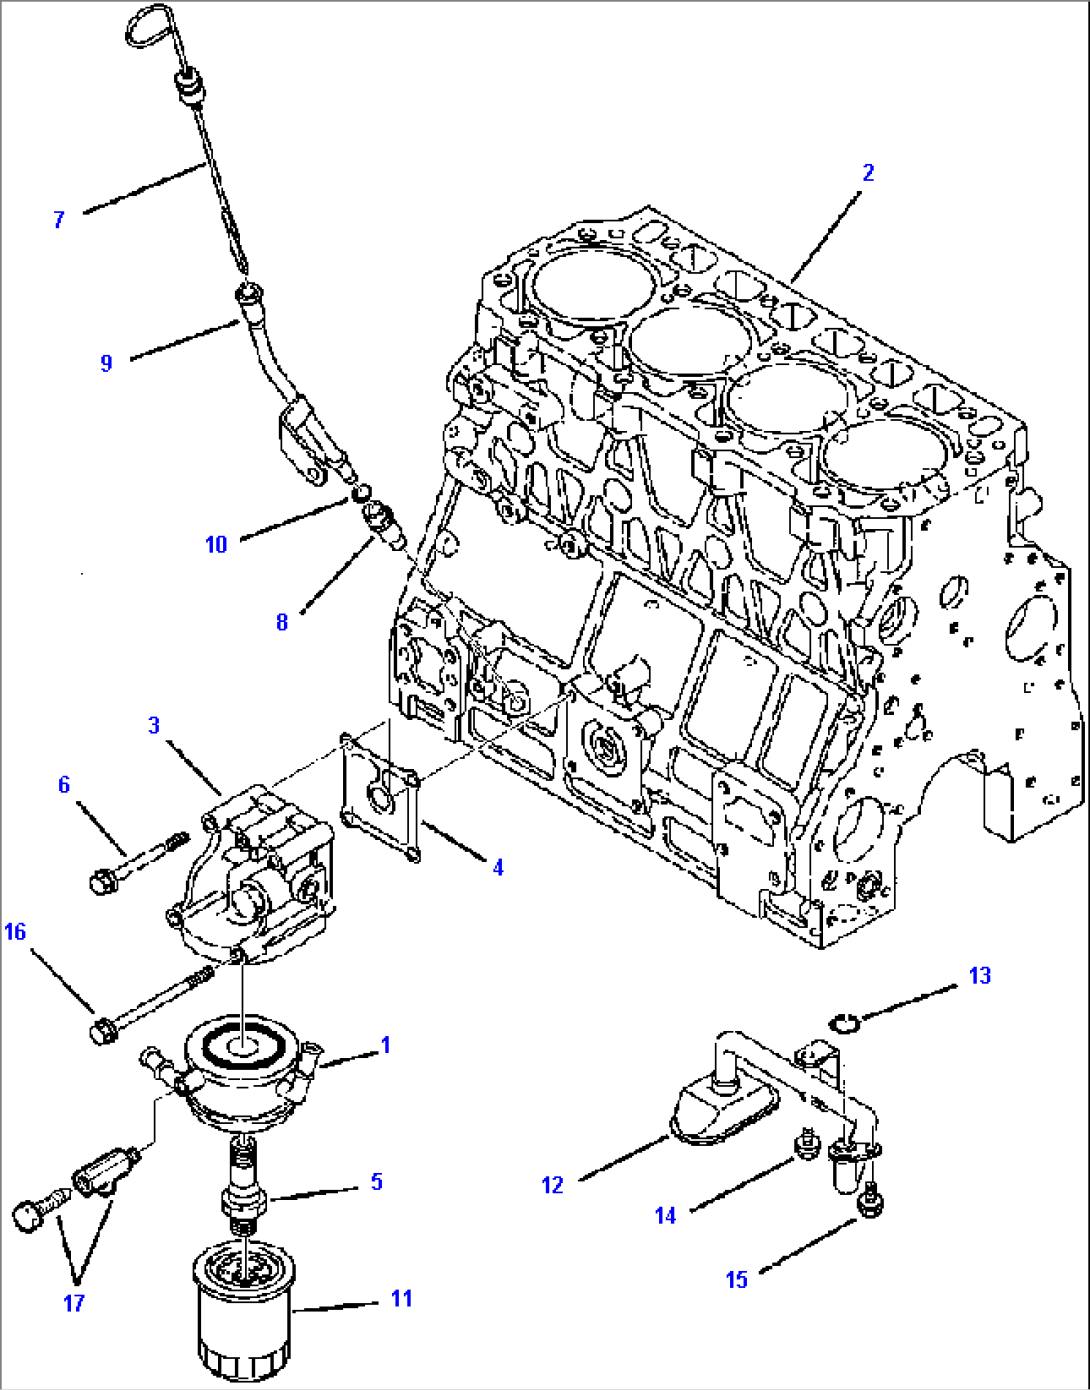 FIG. A0120-01A0 ENGINE - OIL COOLER AND FILTER, SUCTION LINE AND DIPSTICK